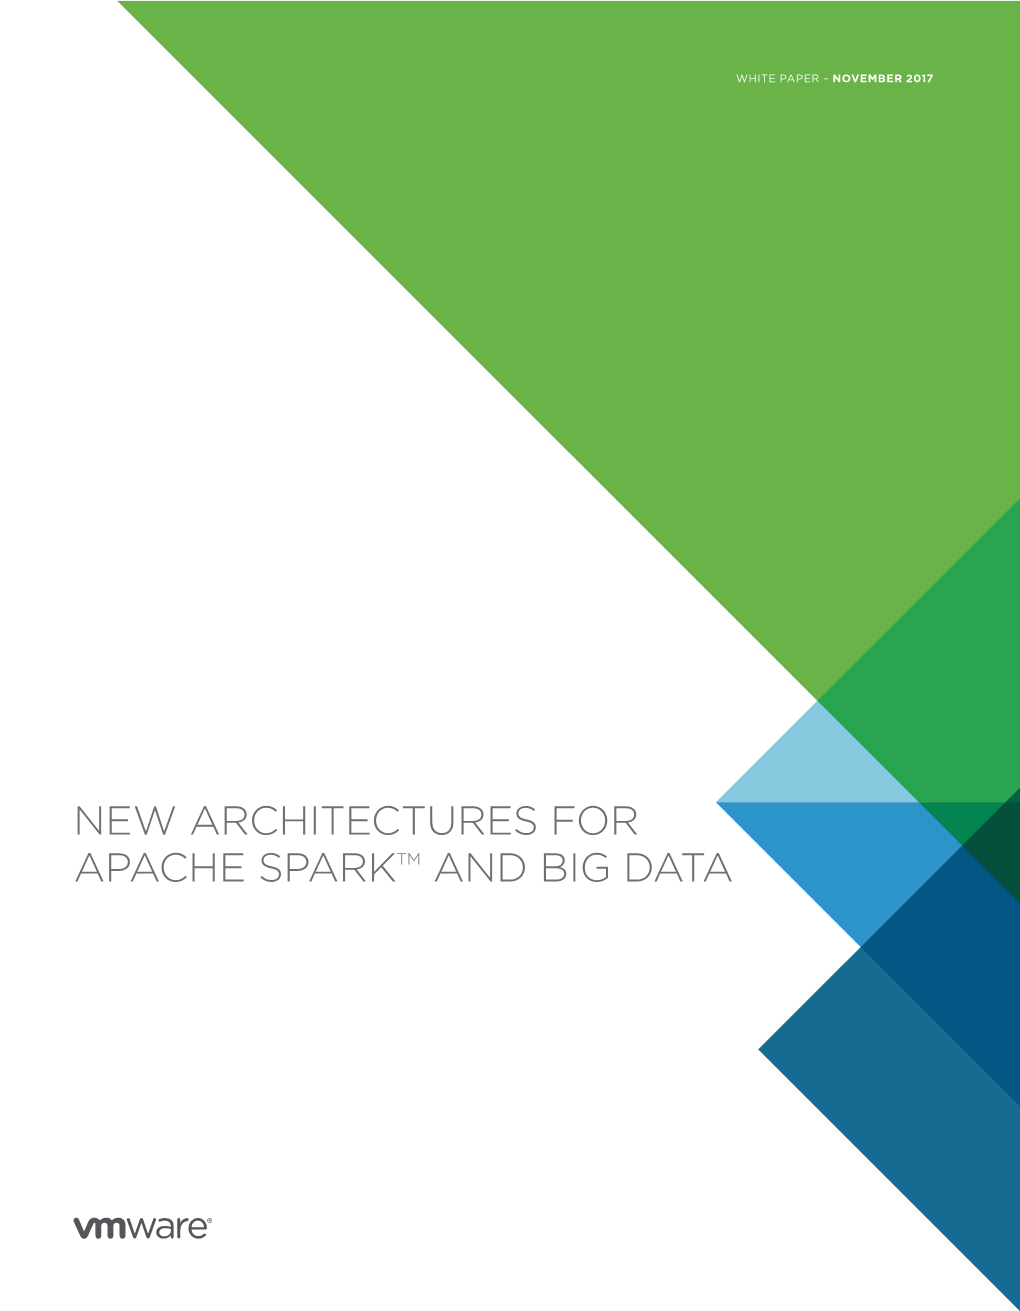 New Architectures for Apache Spark and Big Data